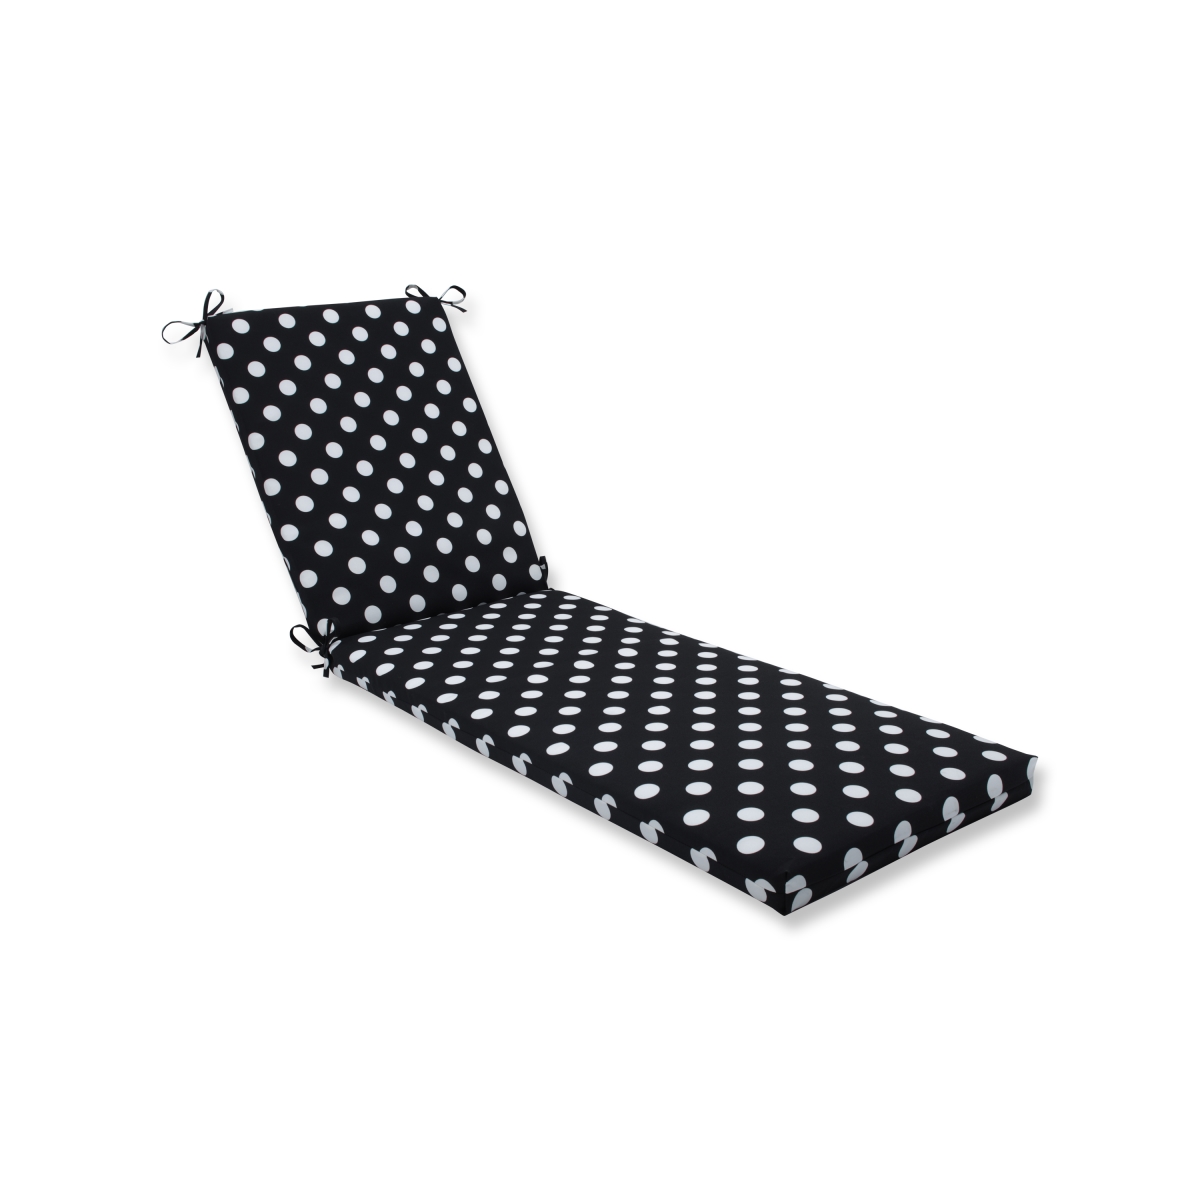 80 X 23 X 3 In. Outdoor & Indoor Polka Dot Chaise Lounge Cushion, Black